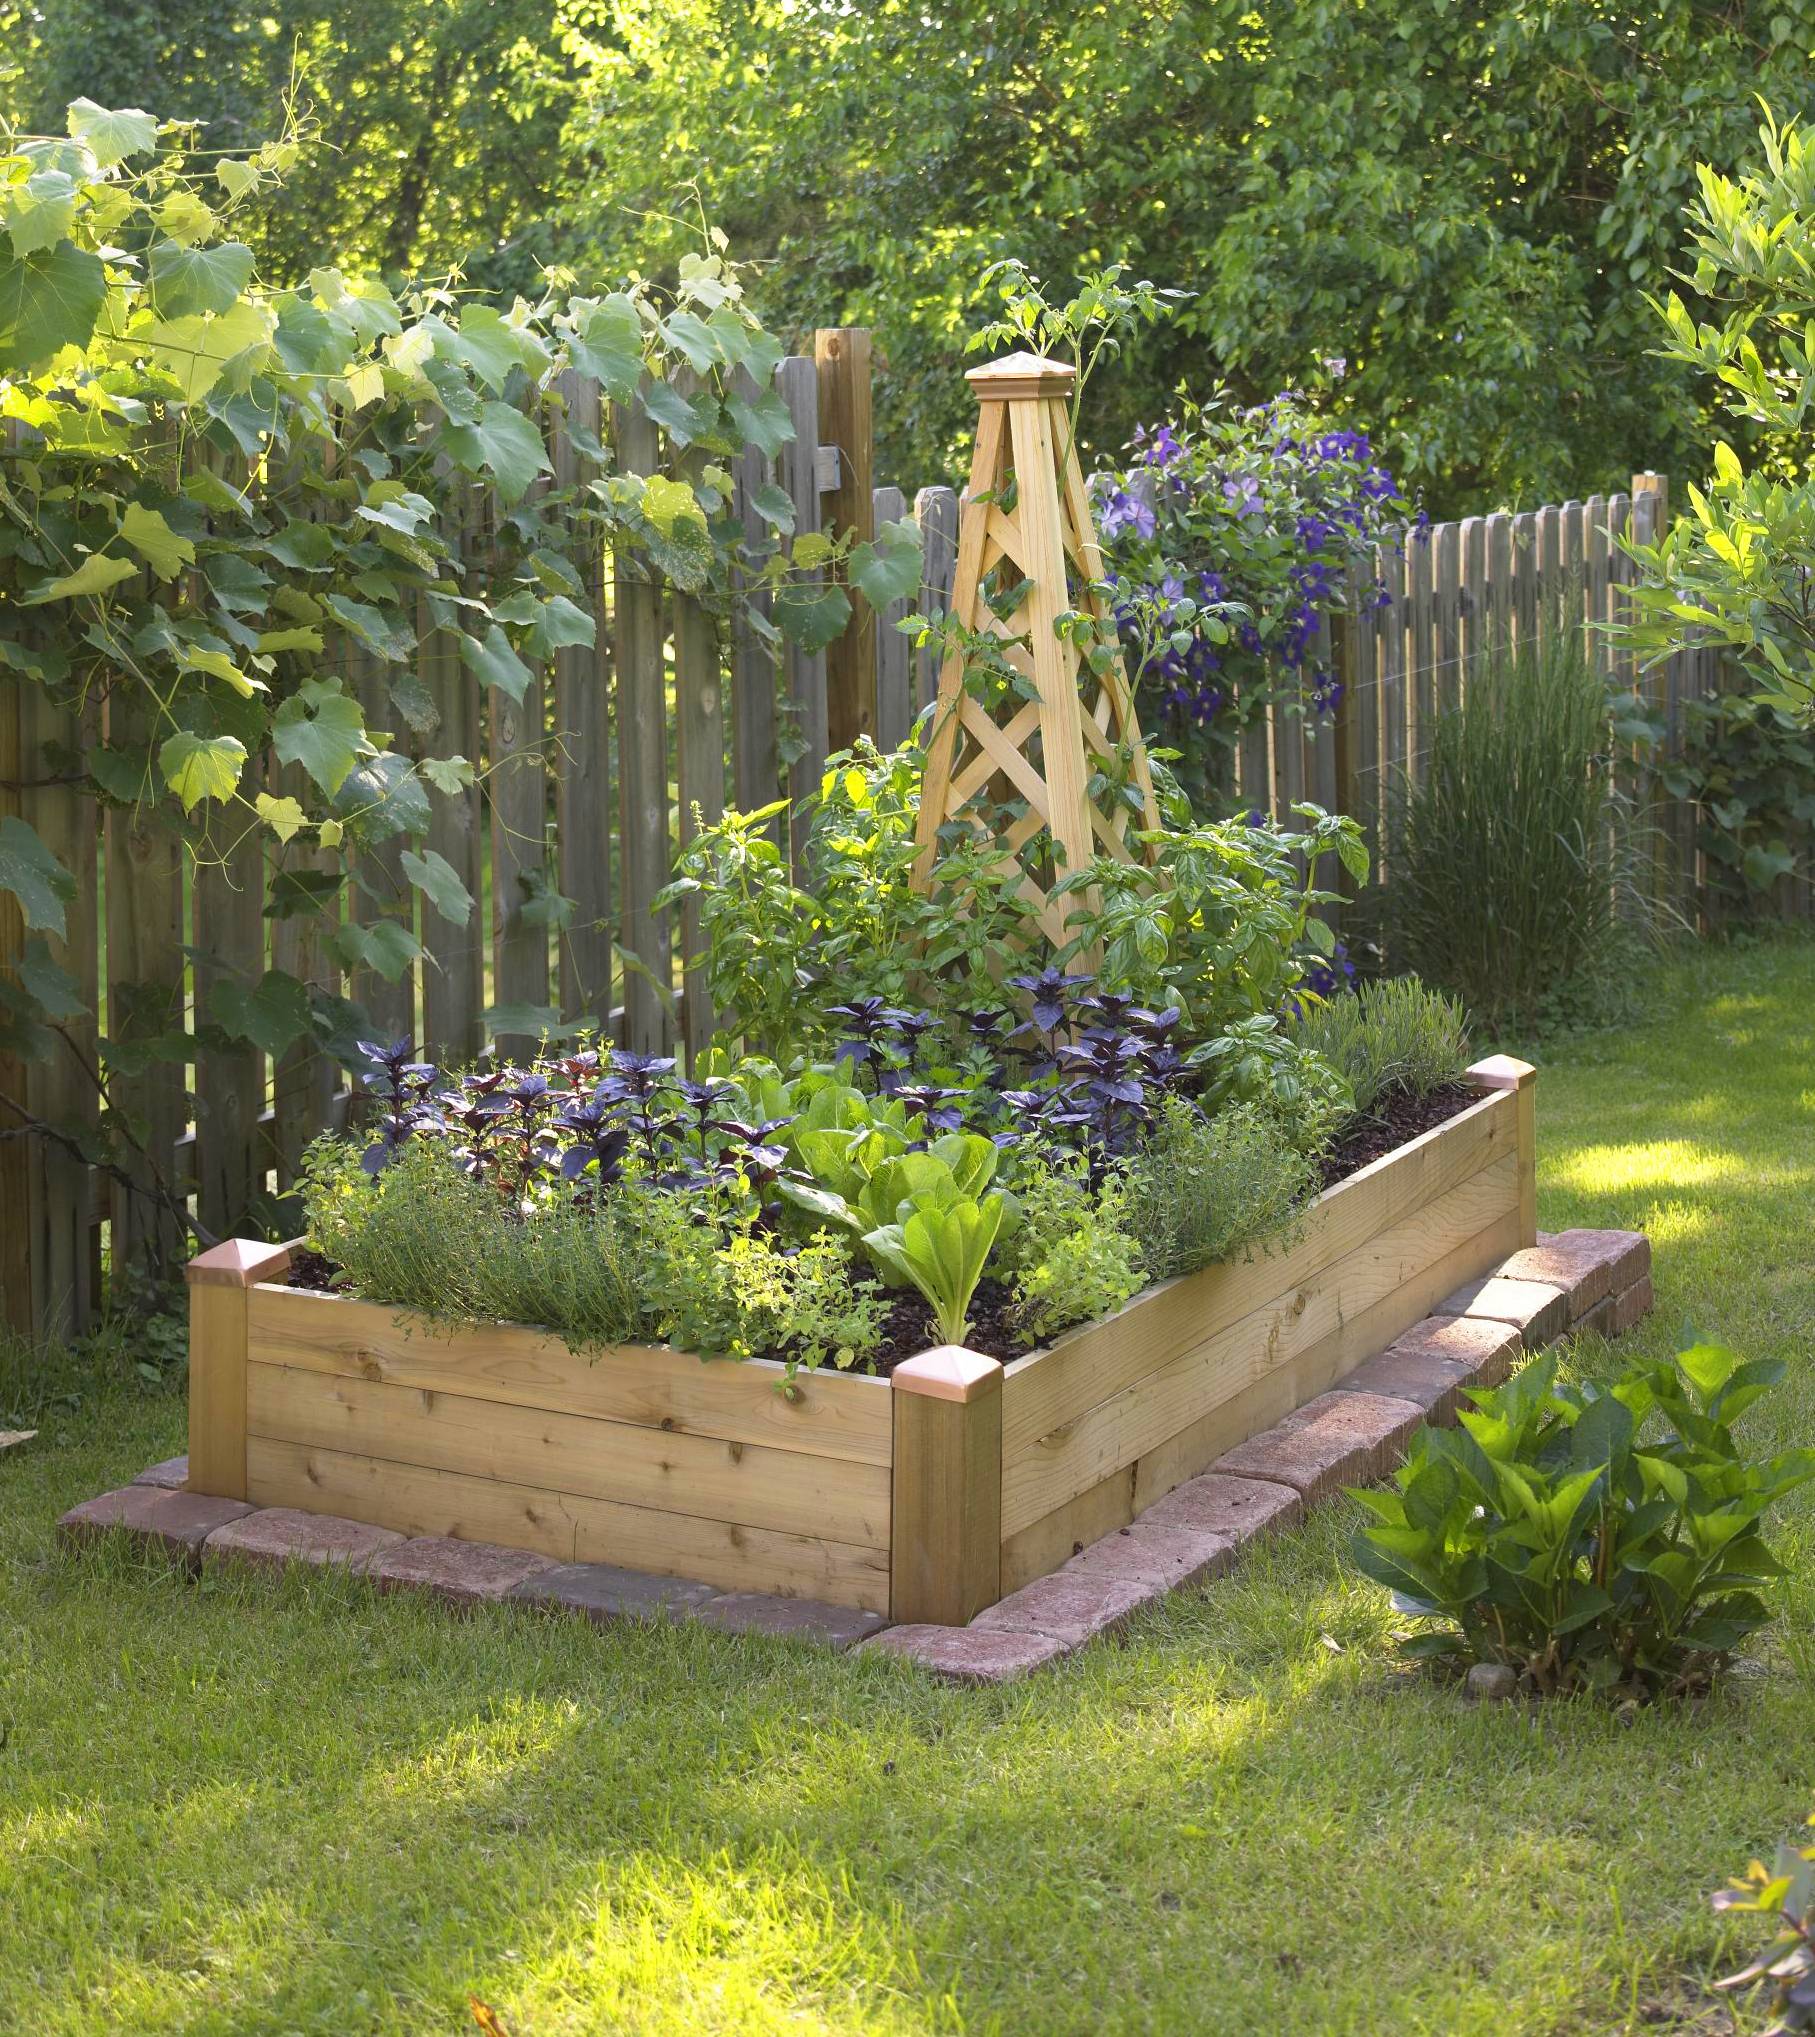 Before You Build Raised Beds For Gardening